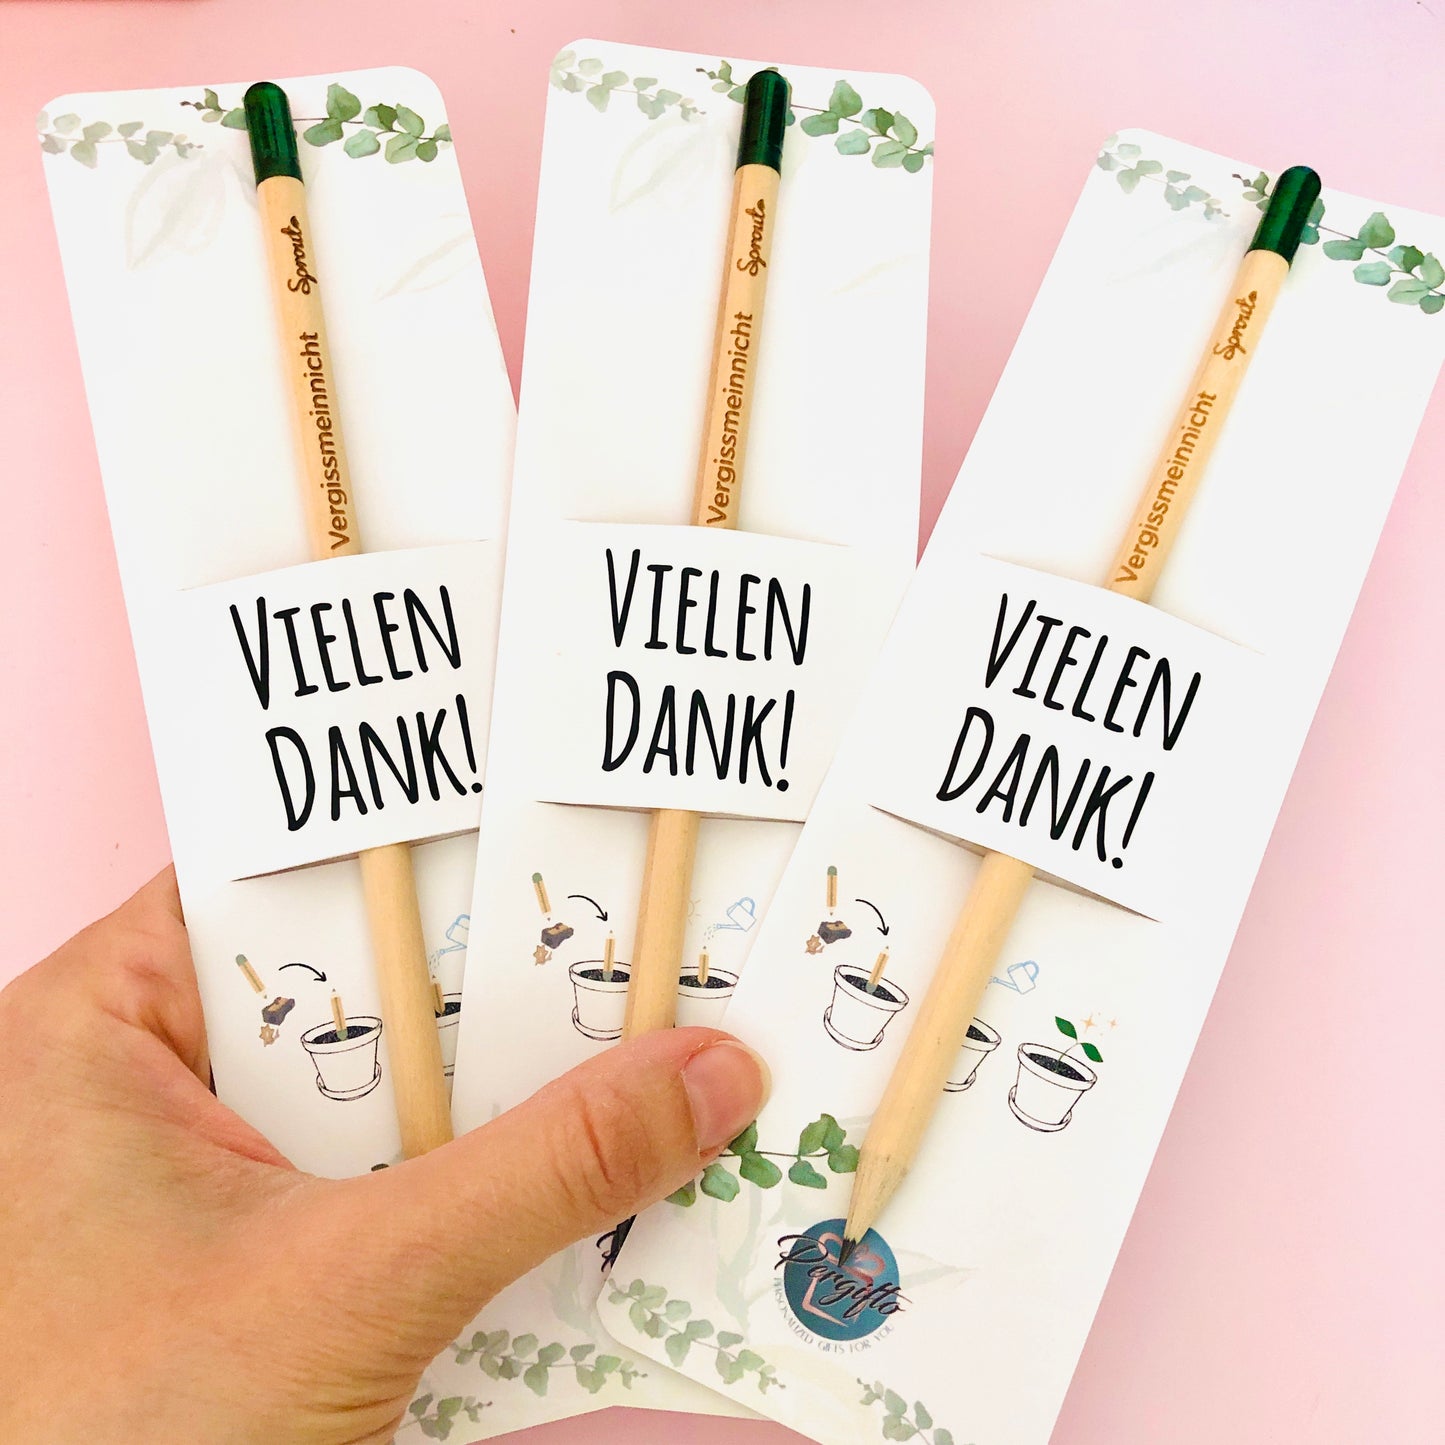 Pencil for planting with your own text - gift to say thank you - pencil with personalized card - small gift